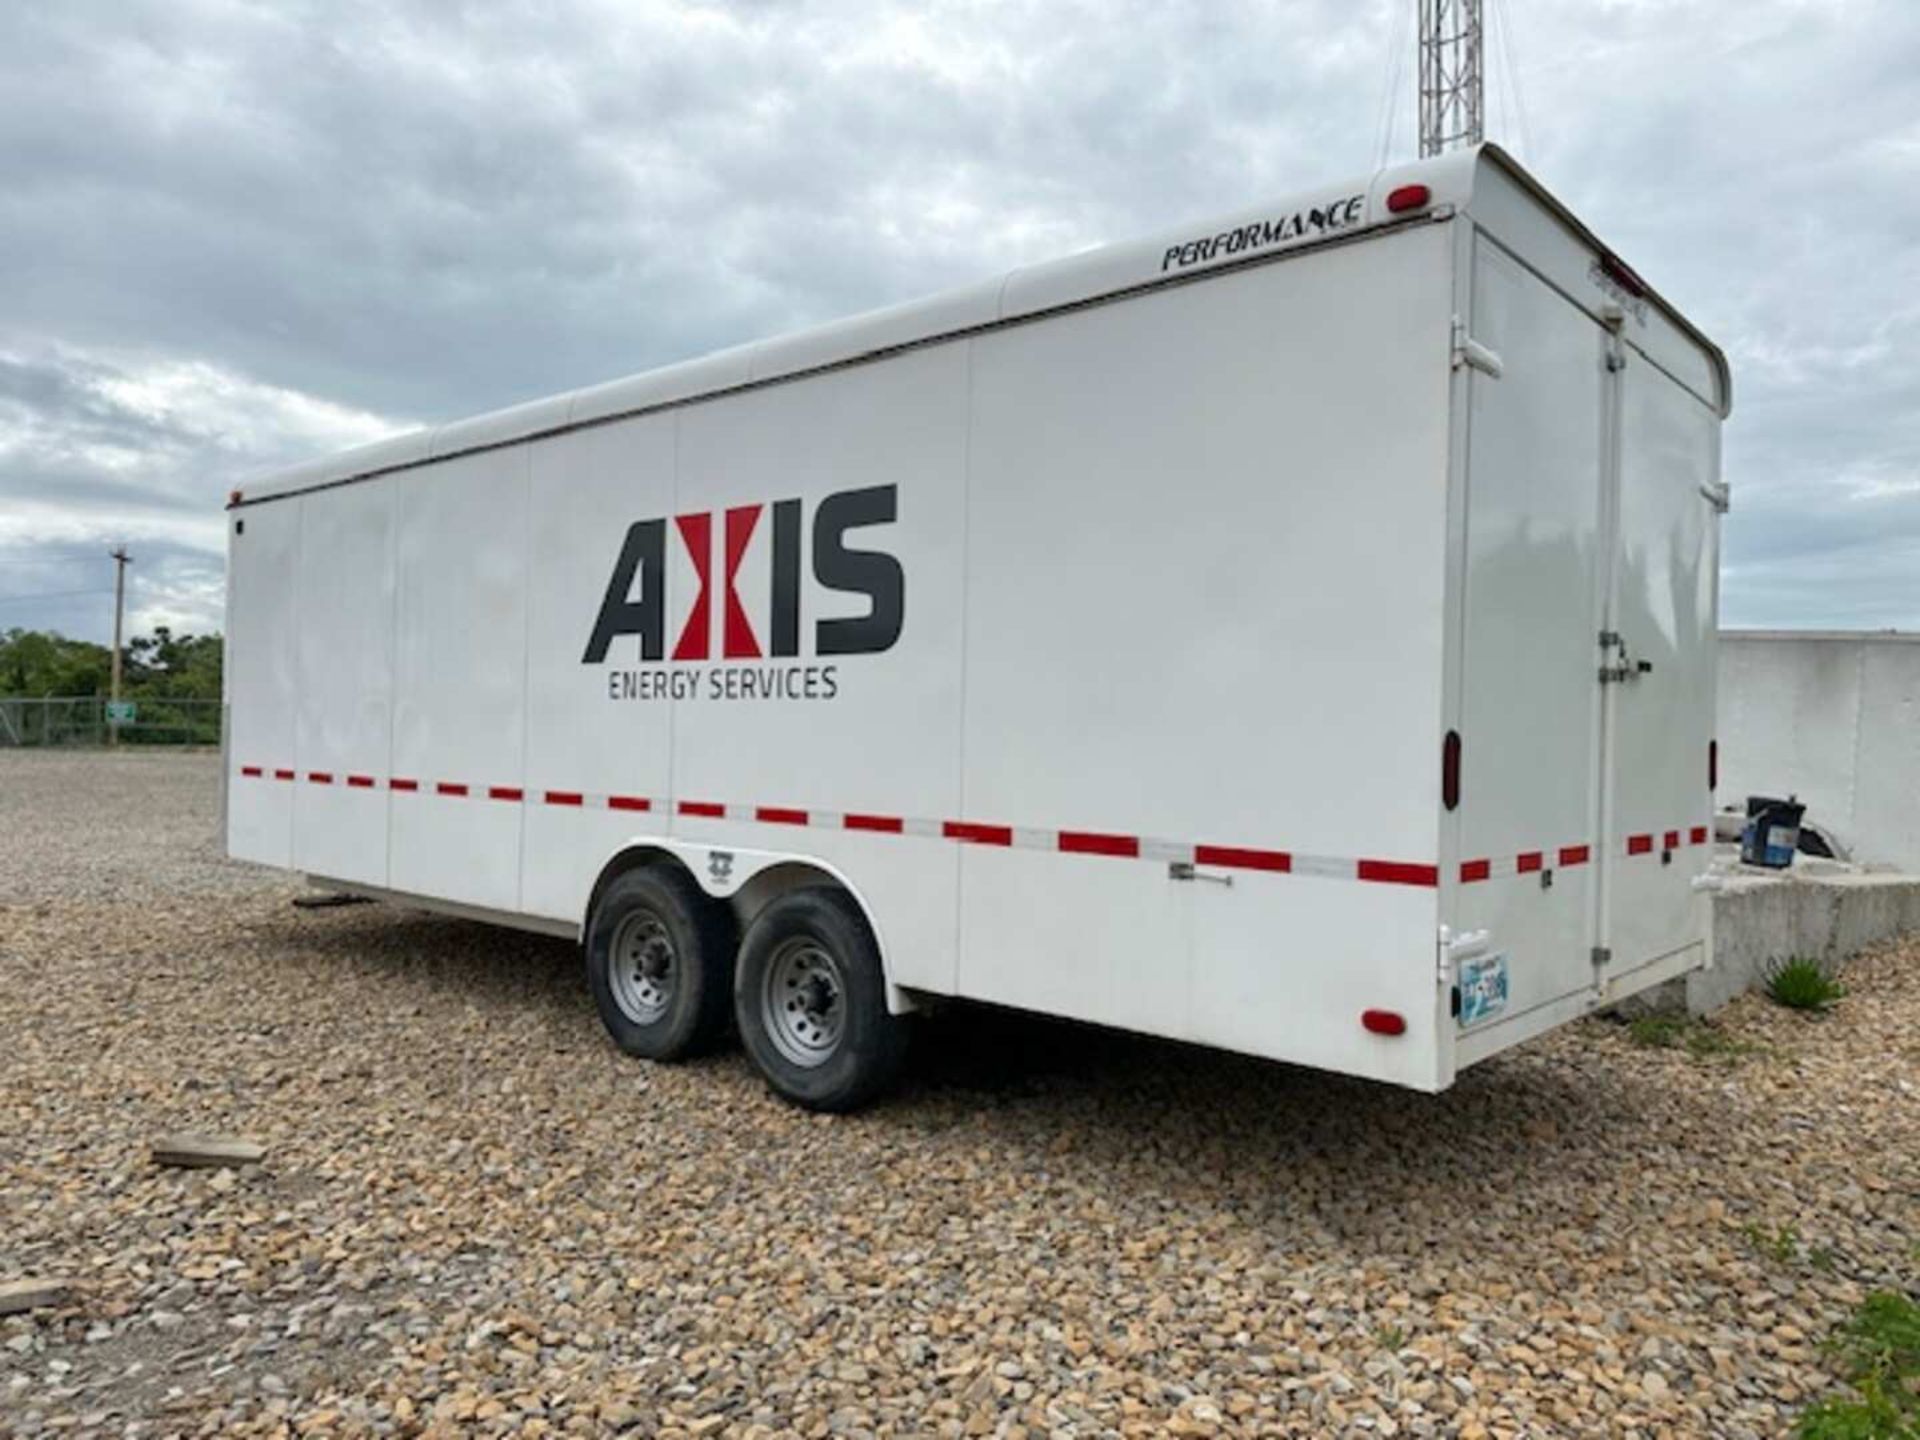 2019 PERFORMANCE TRAILERS BY PARKER 8'6"W X 25'L - Image 2 of 4